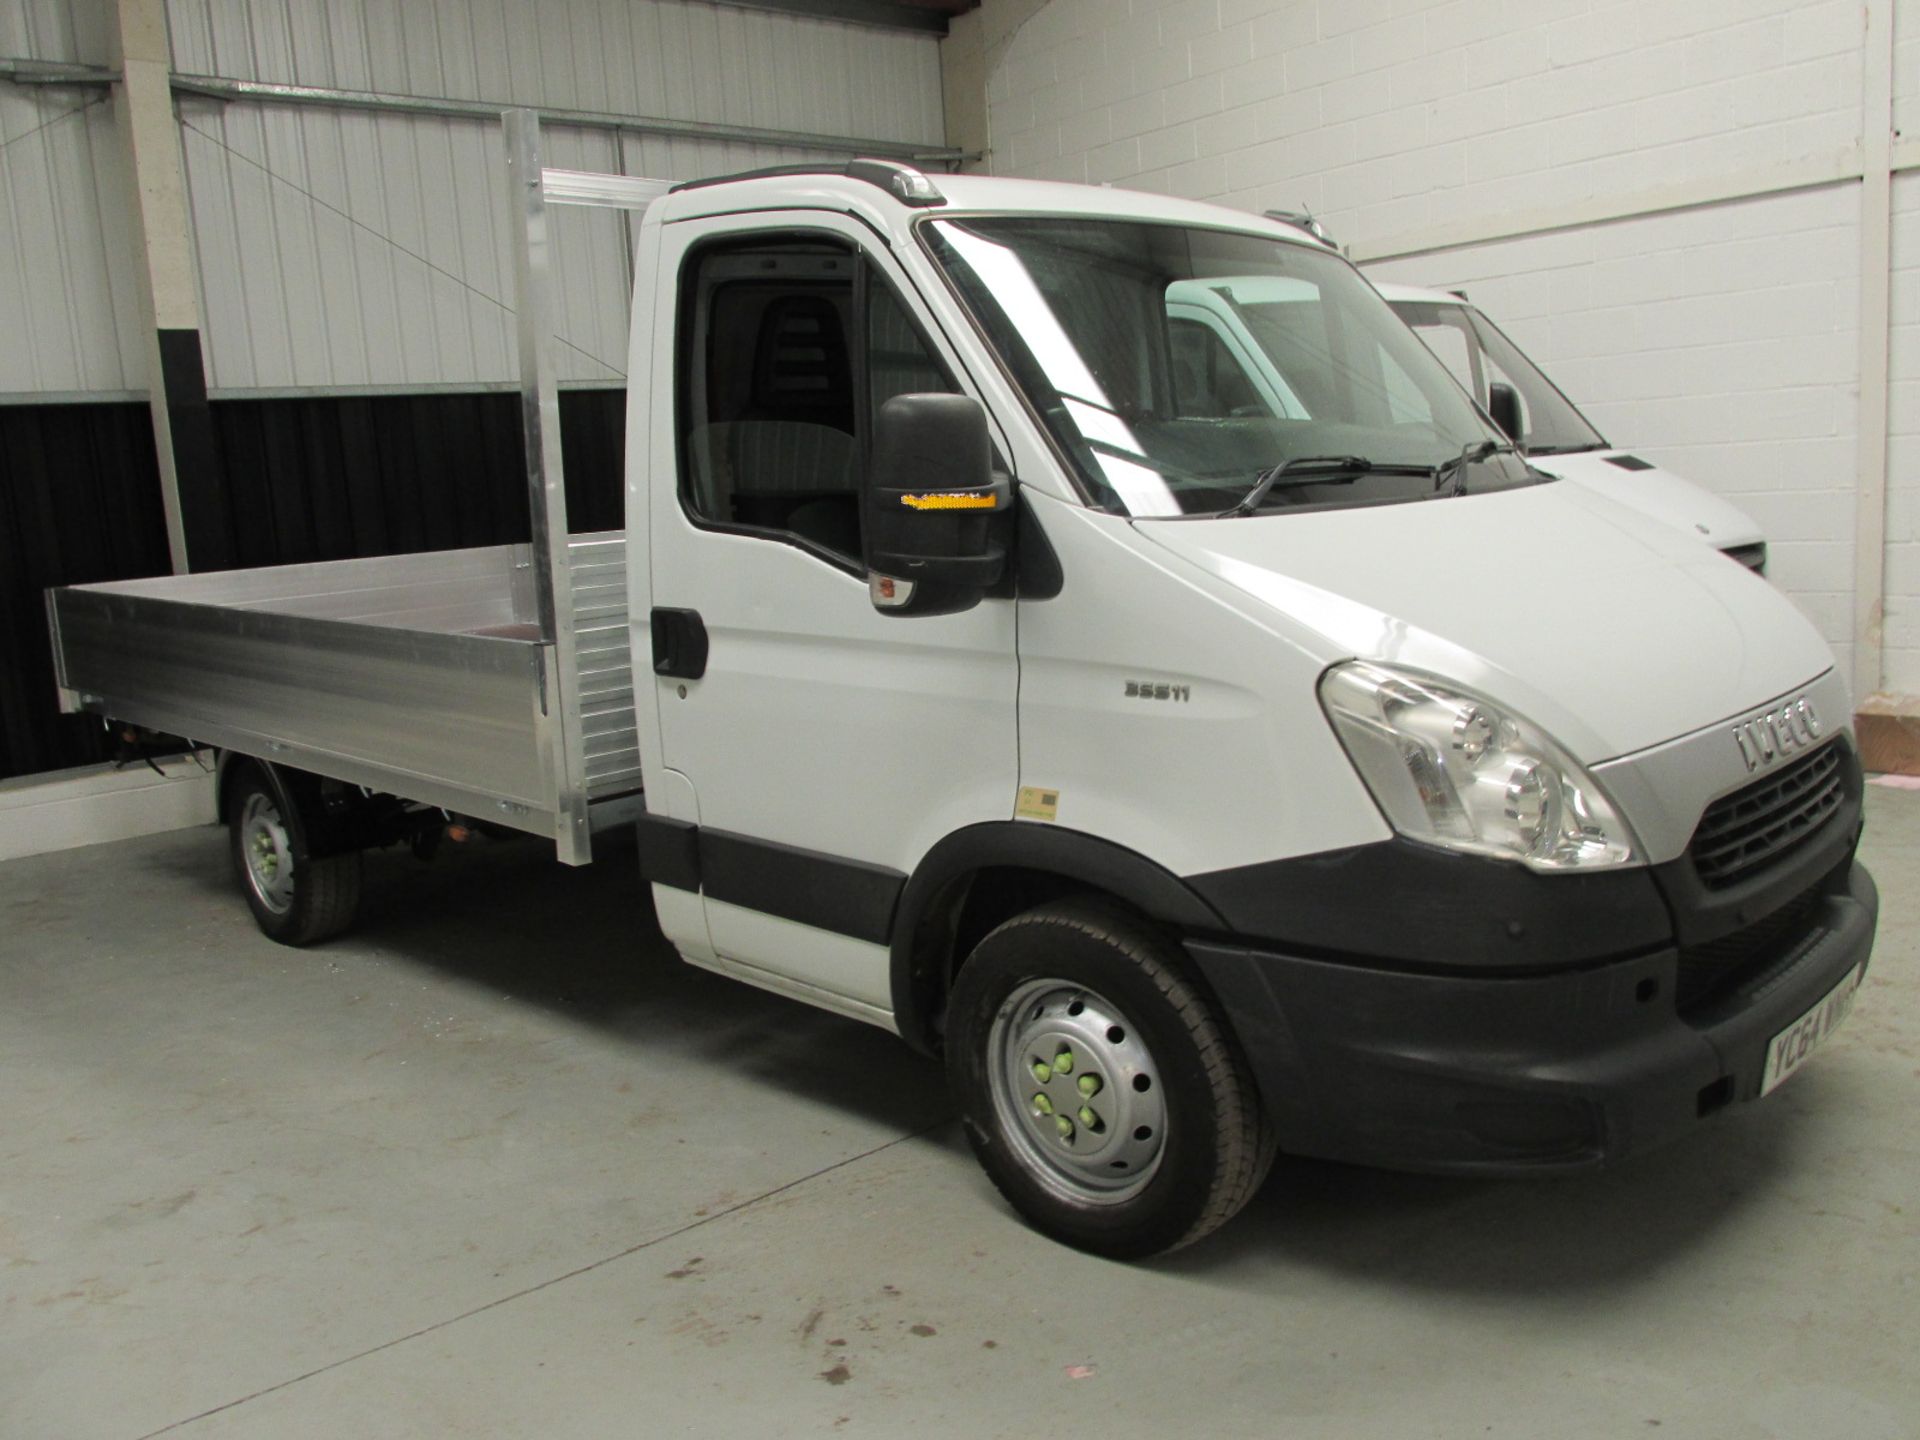 2014 Iveco Daily 35S11 3750 WB 2.4 HPi - Image 4 of 17